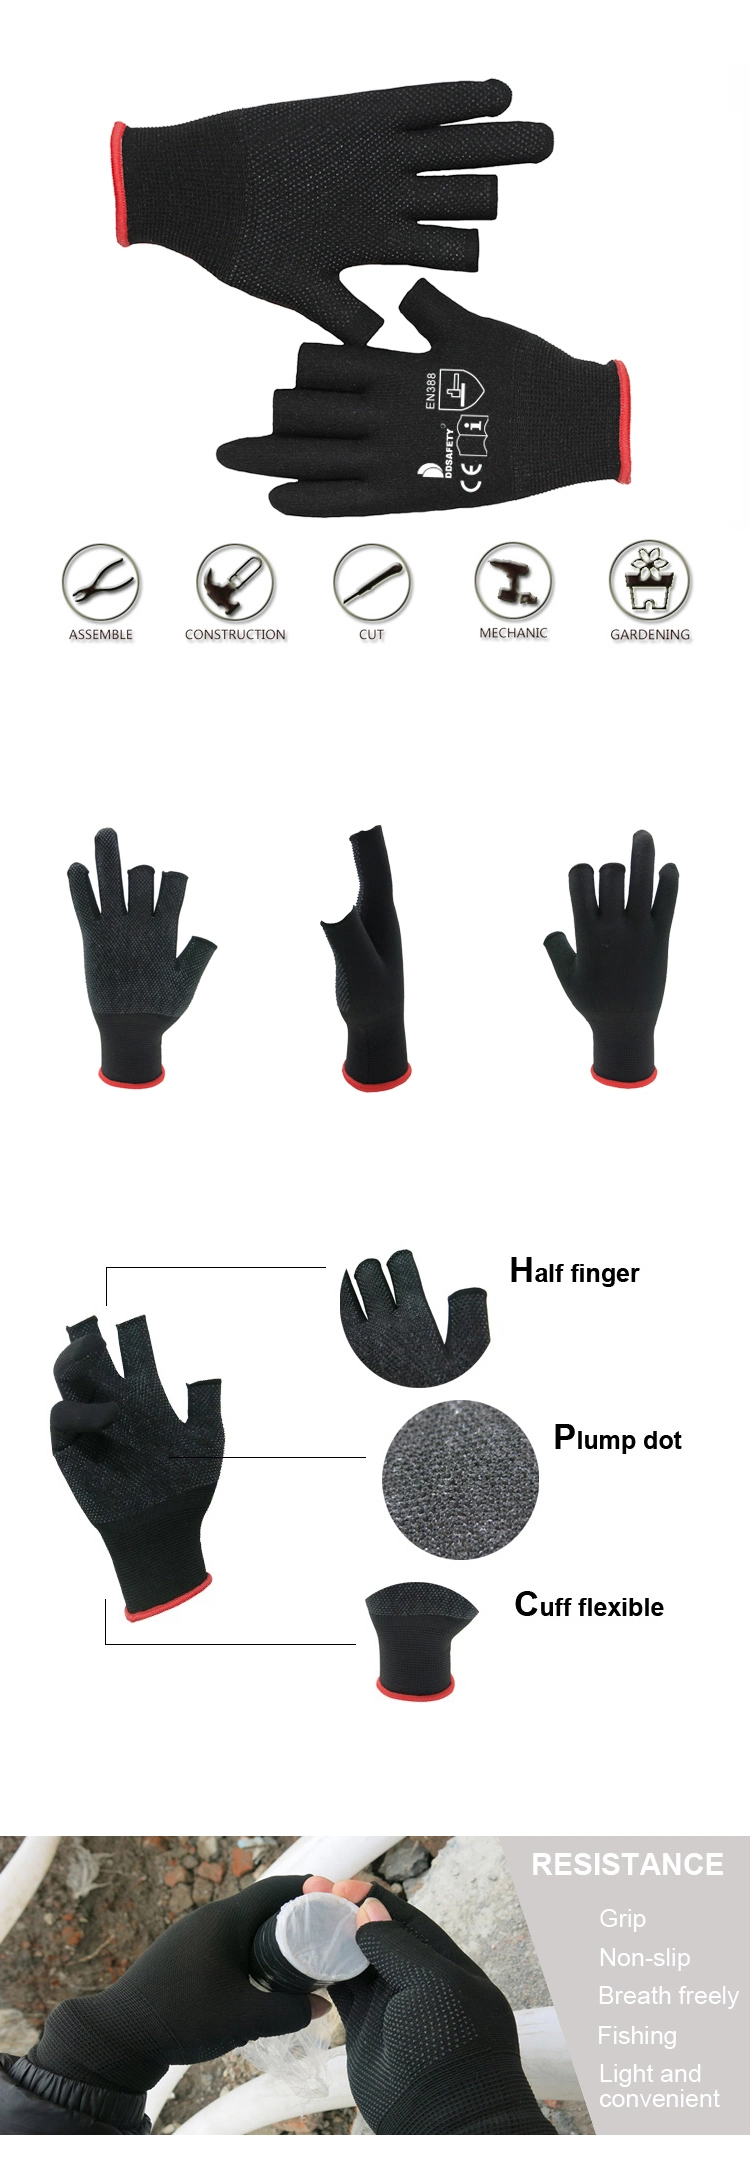 Ddsafety Driver Gloves with Nylon Seamless for Working